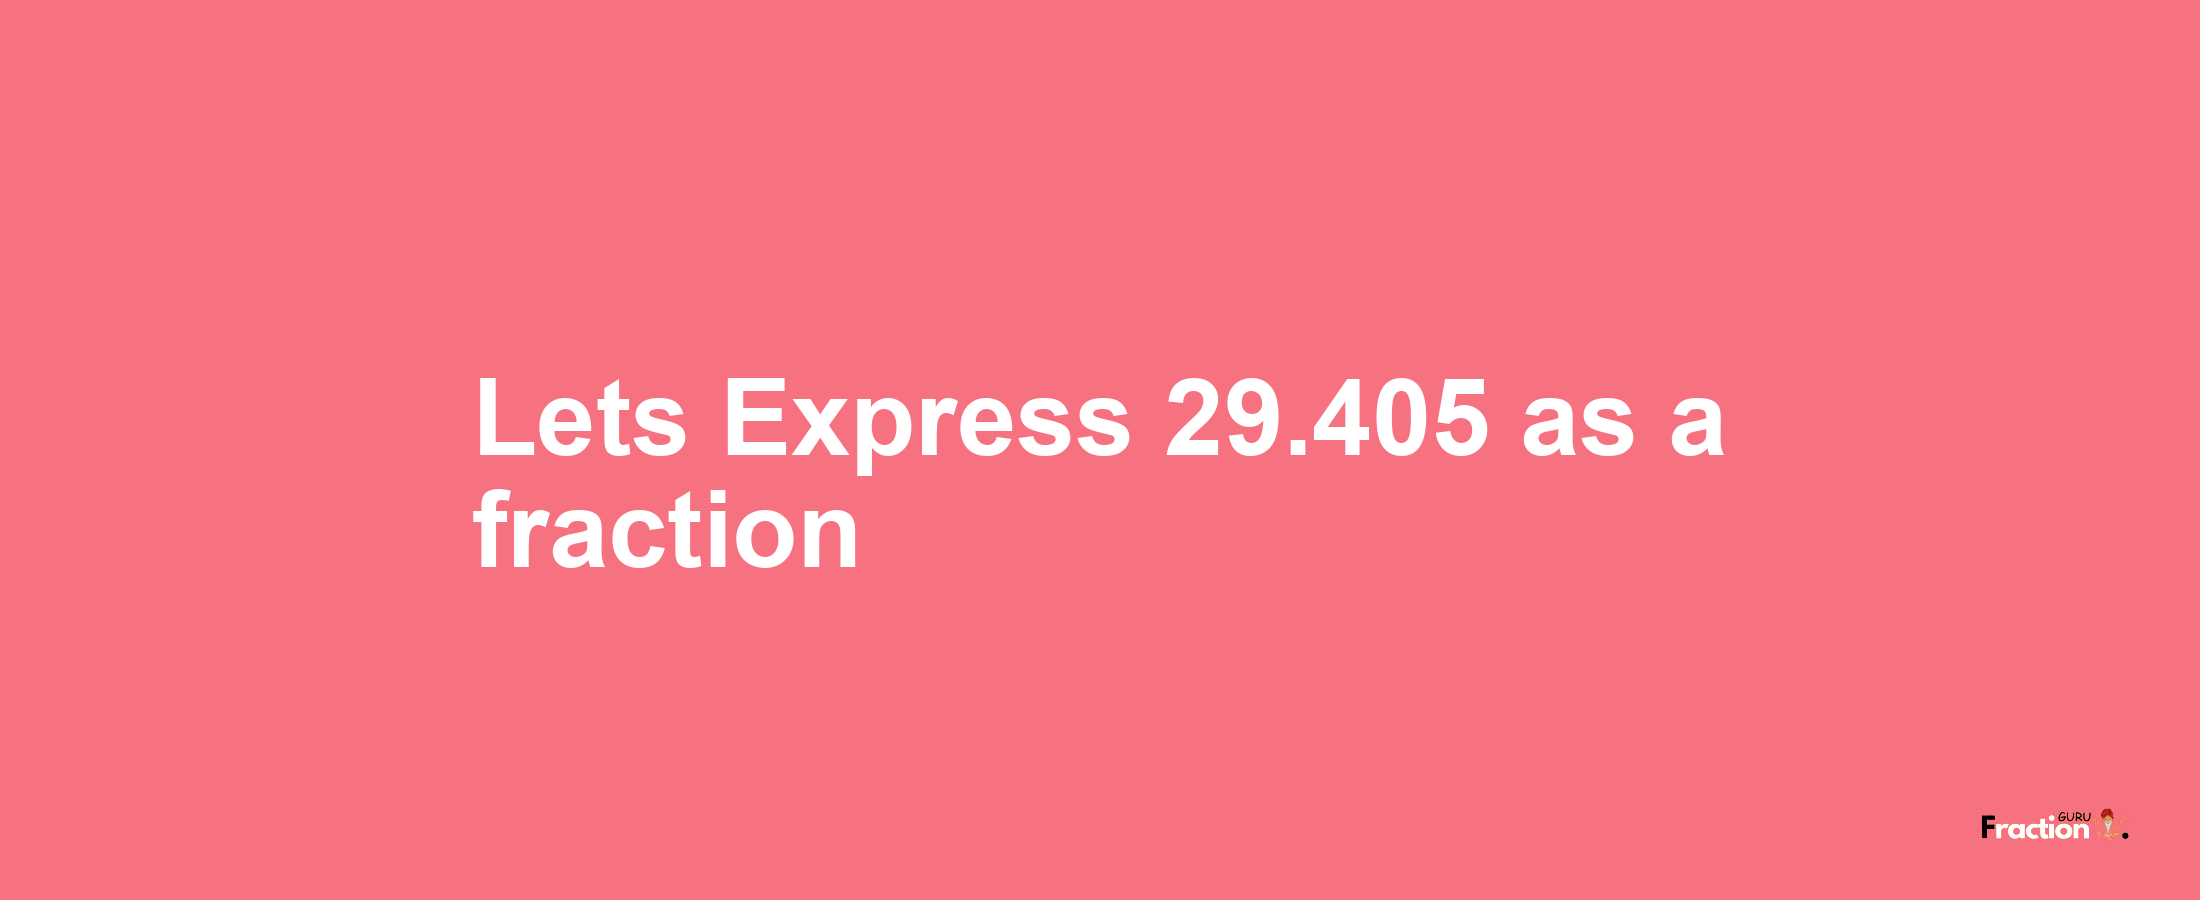 Lets Express 29.405 as afraction